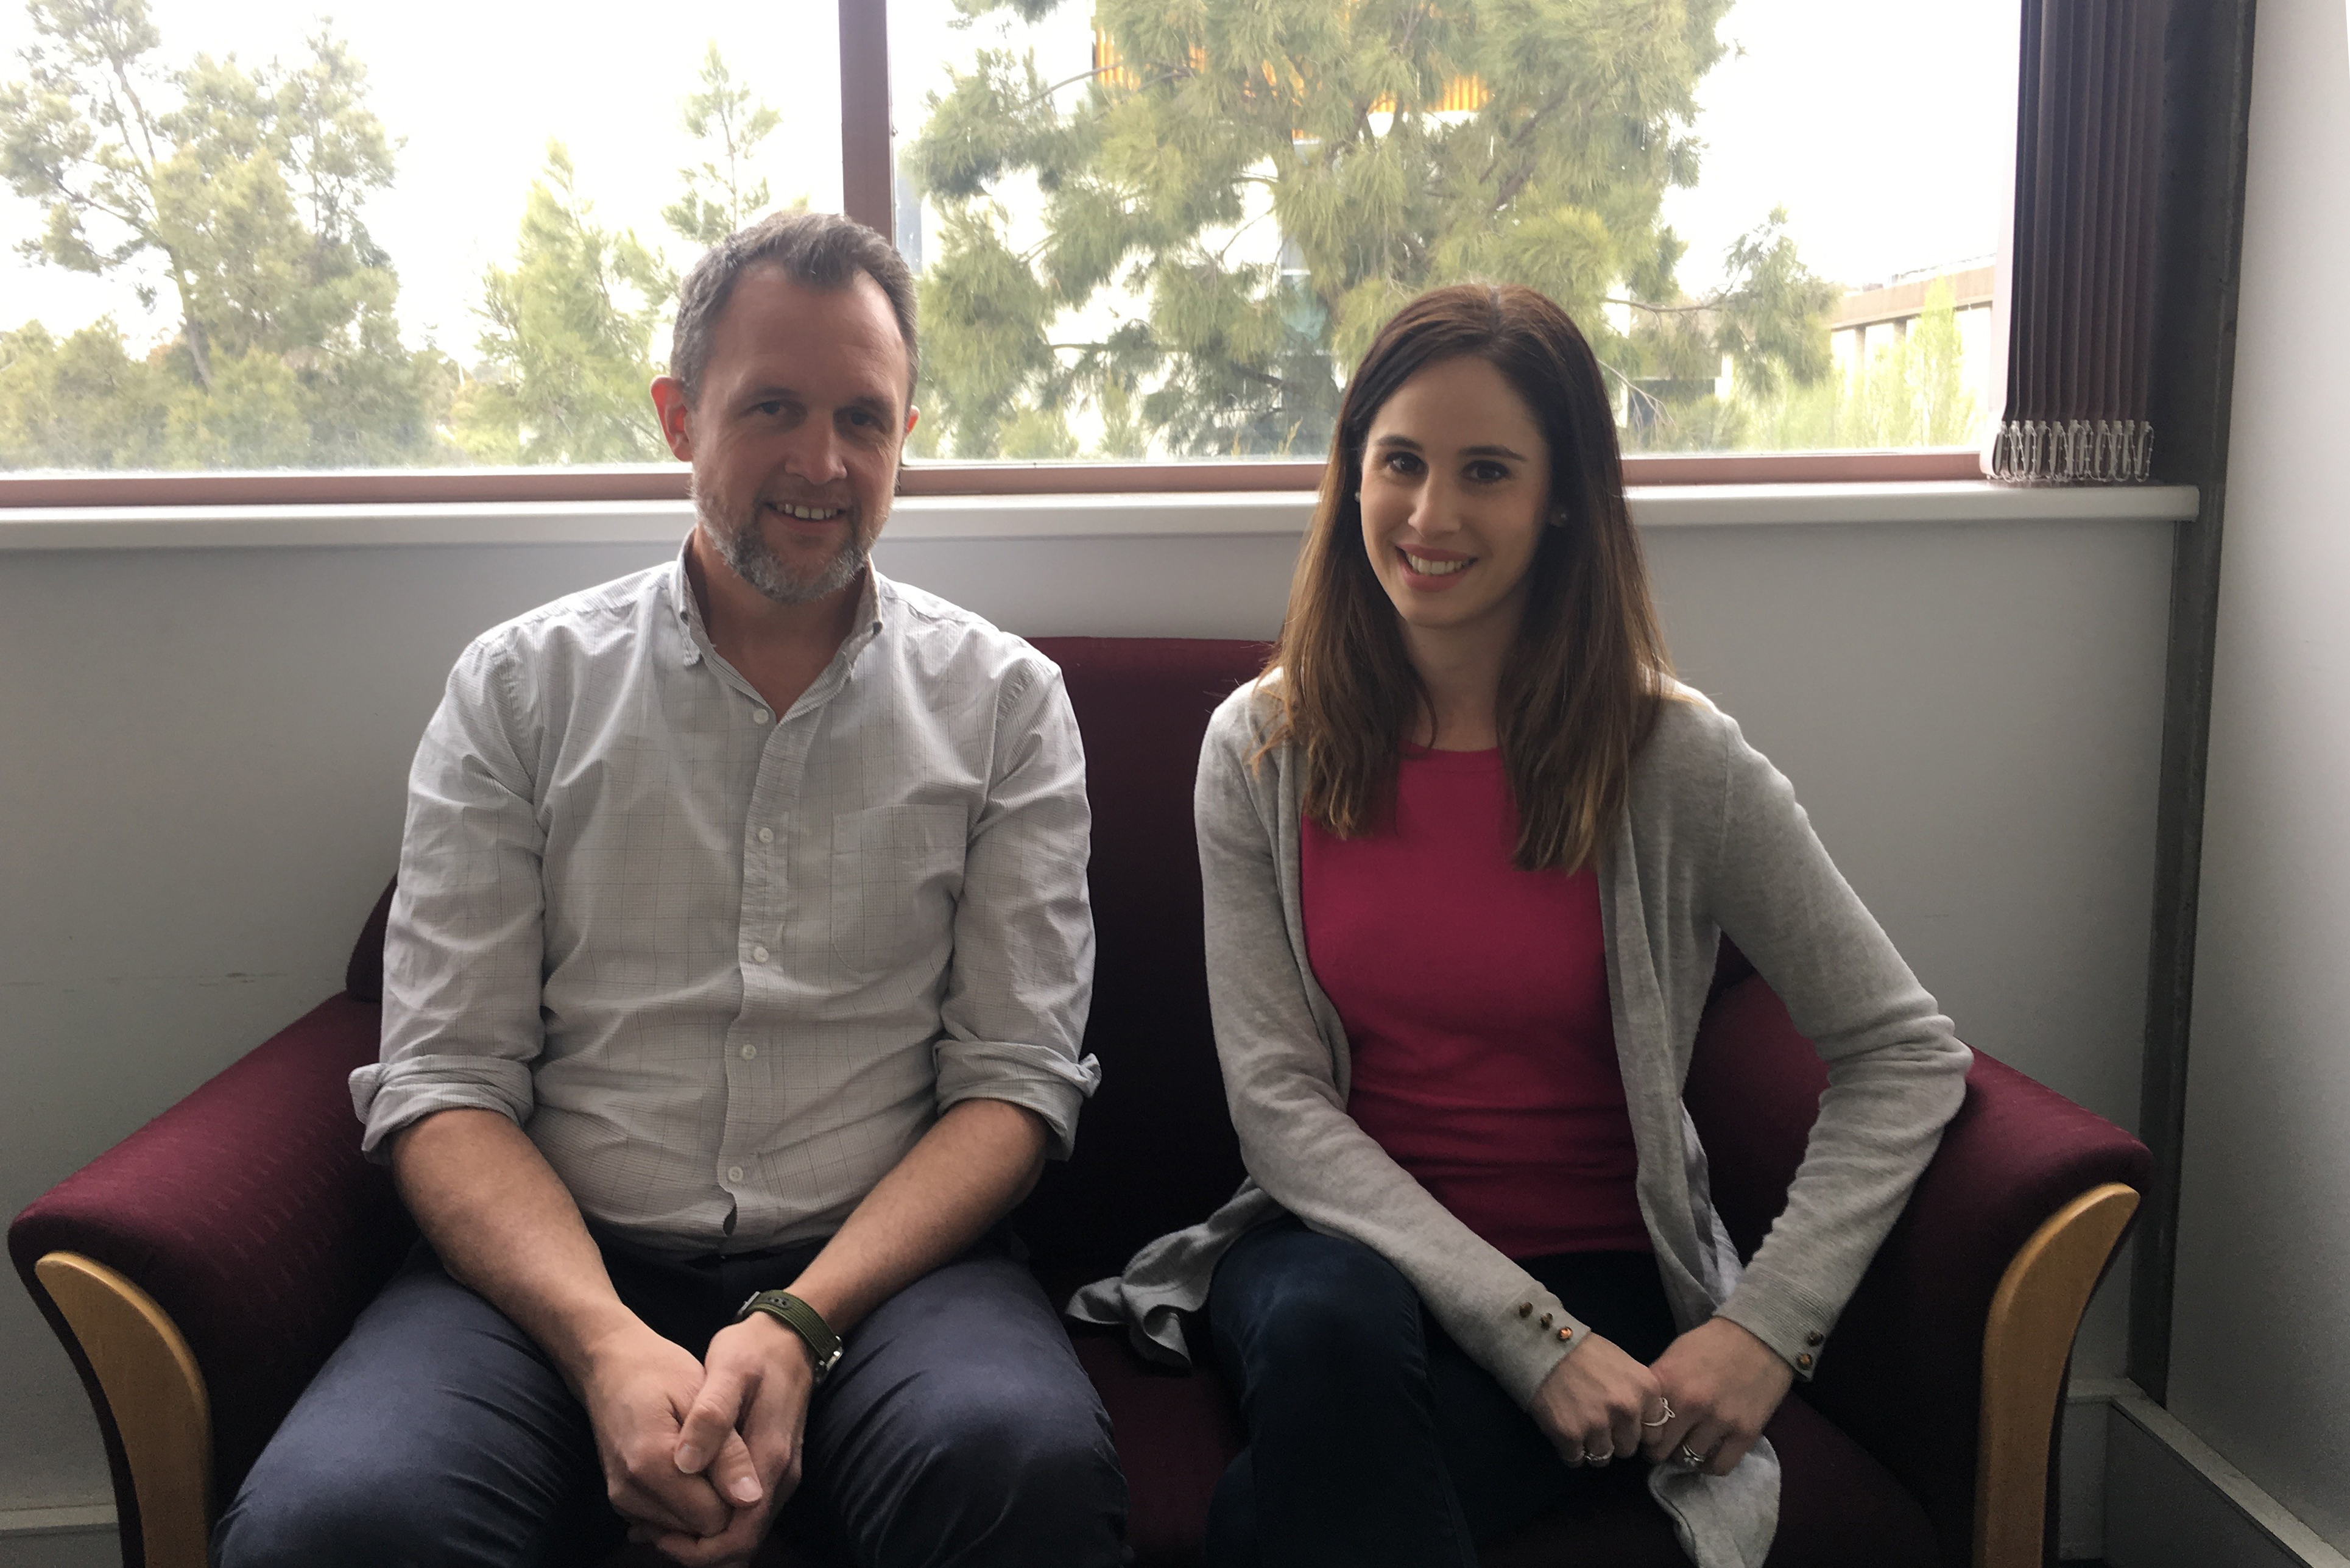 Dr Dean Buckmaster is serving as clinical lead for the WOKE program, while Dr Clare Watsford is student supervisor for its research component.